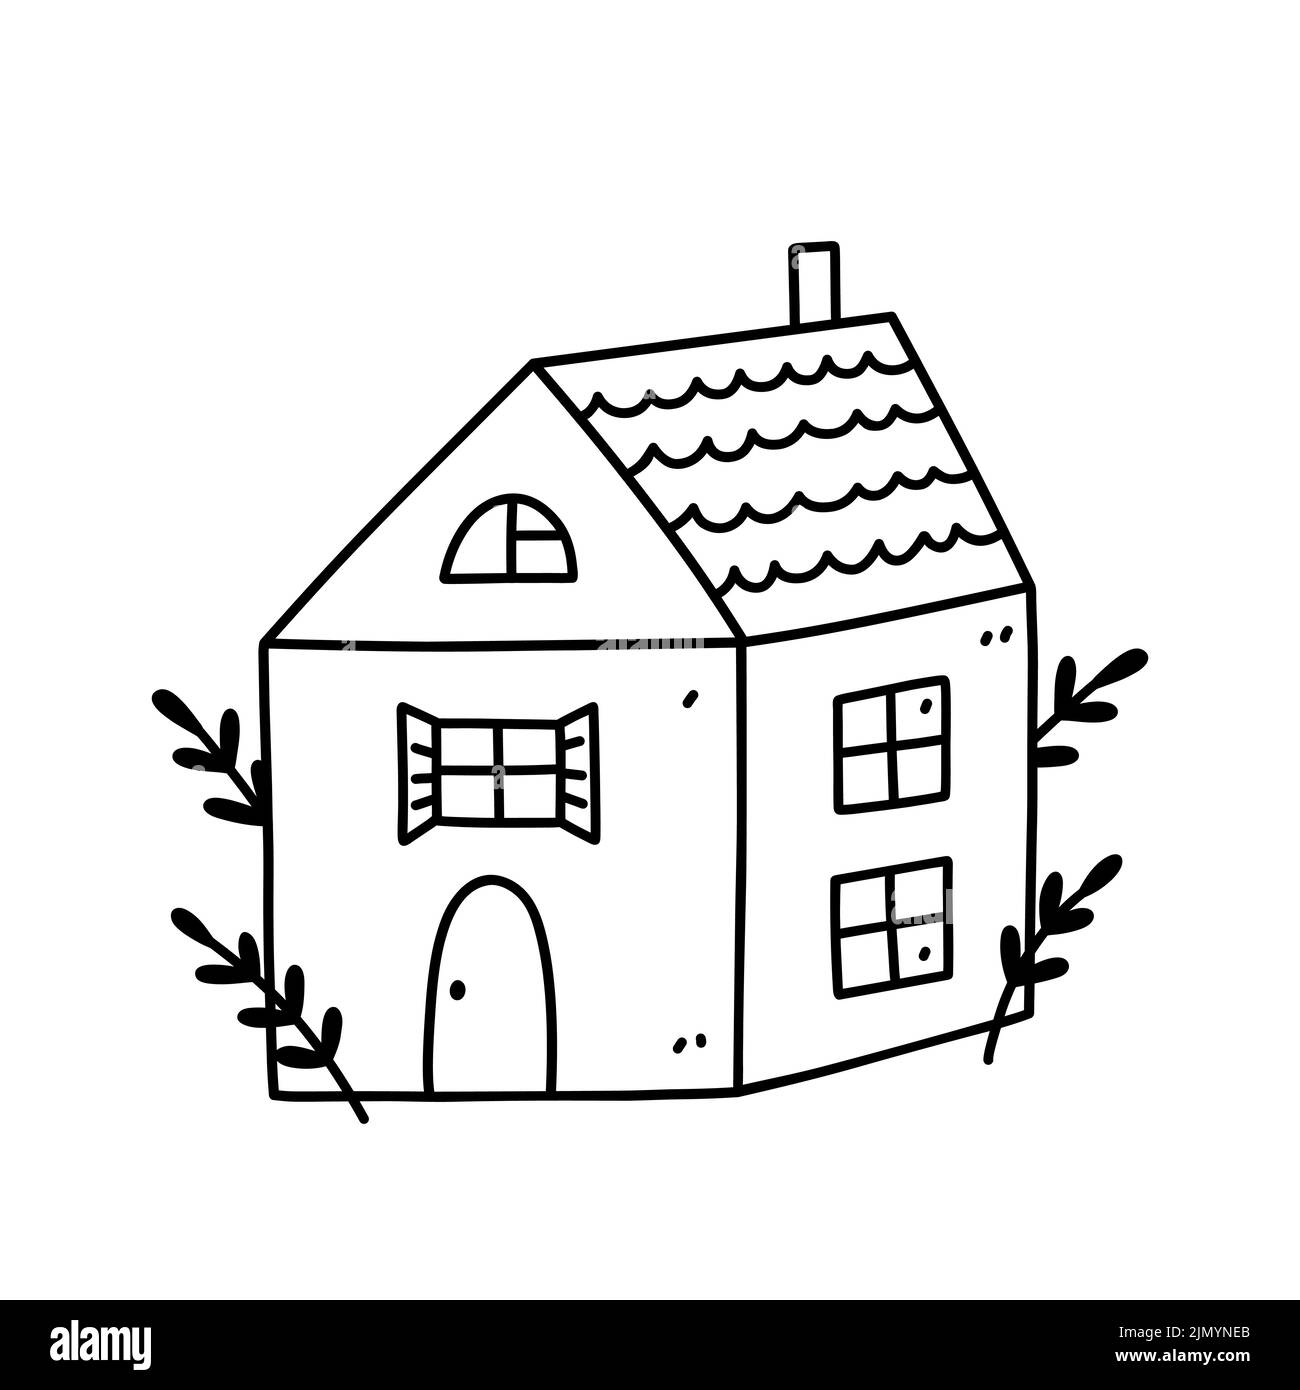 Rental Inspection Committee - Draw Kutcha House And Pucca House - (480x382)  Png Clipart Download